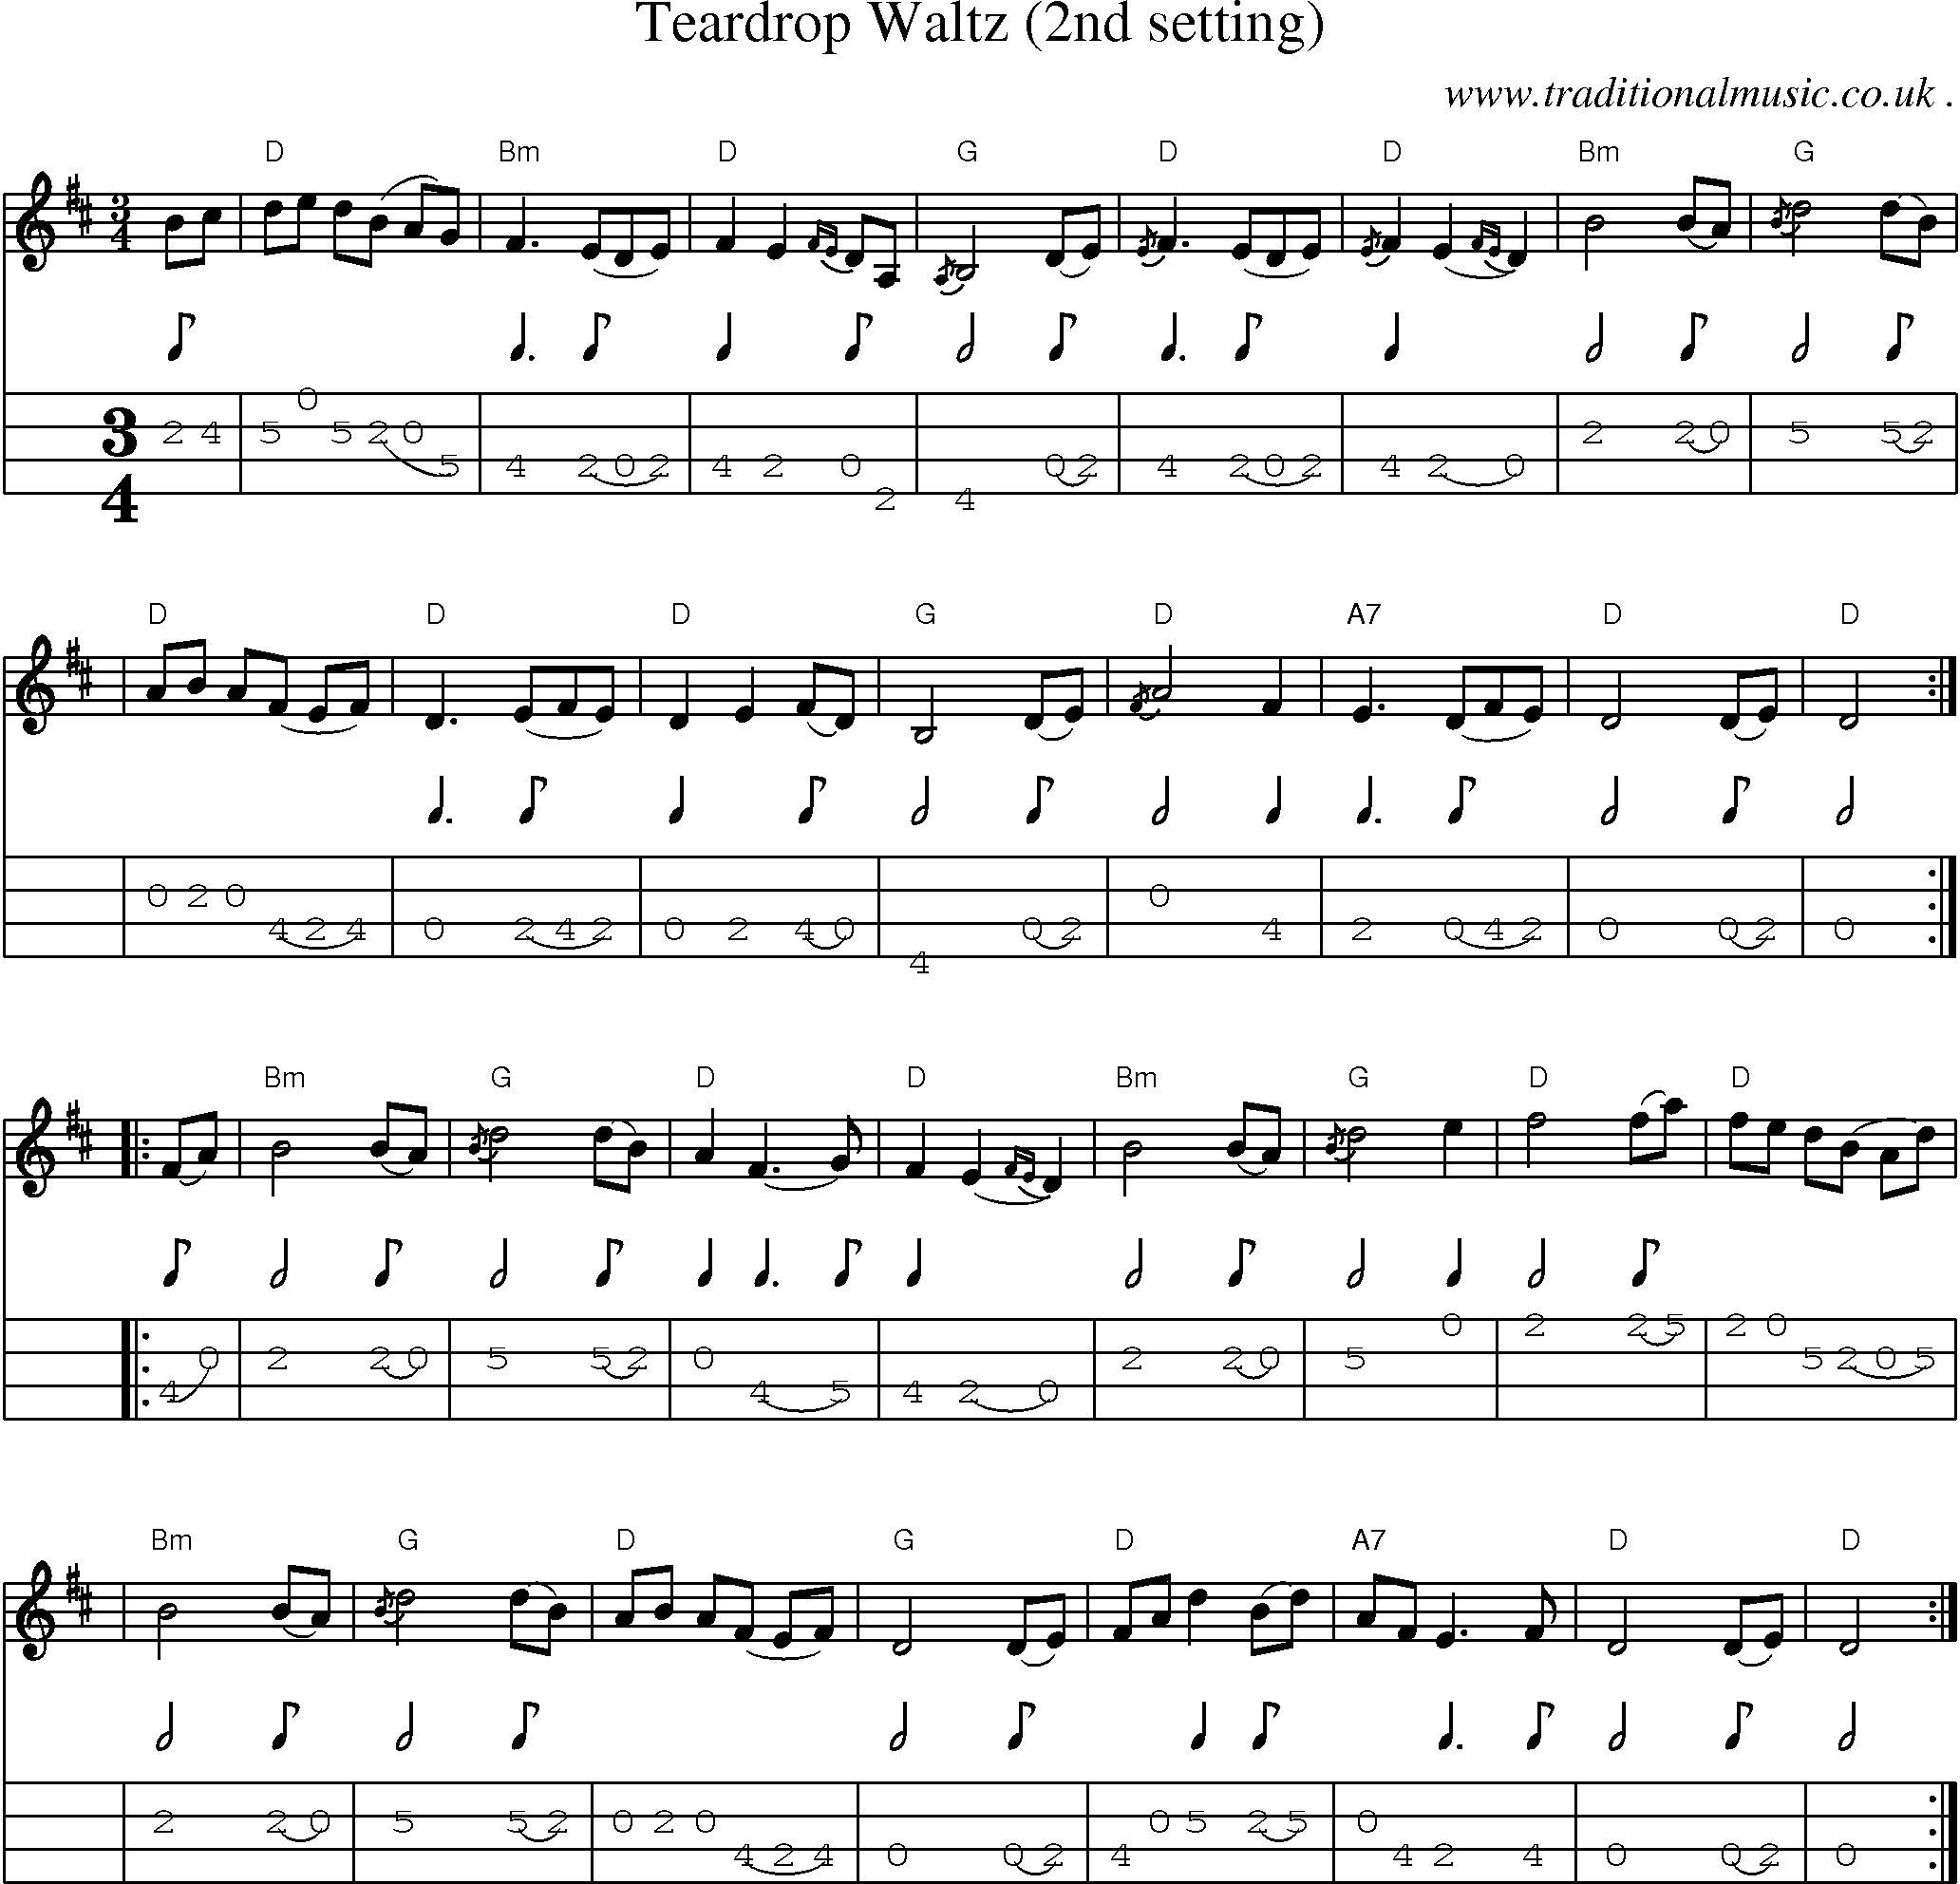 Music Score and Mandolin Tabs for Teardrop Waltz (2nd Setting)